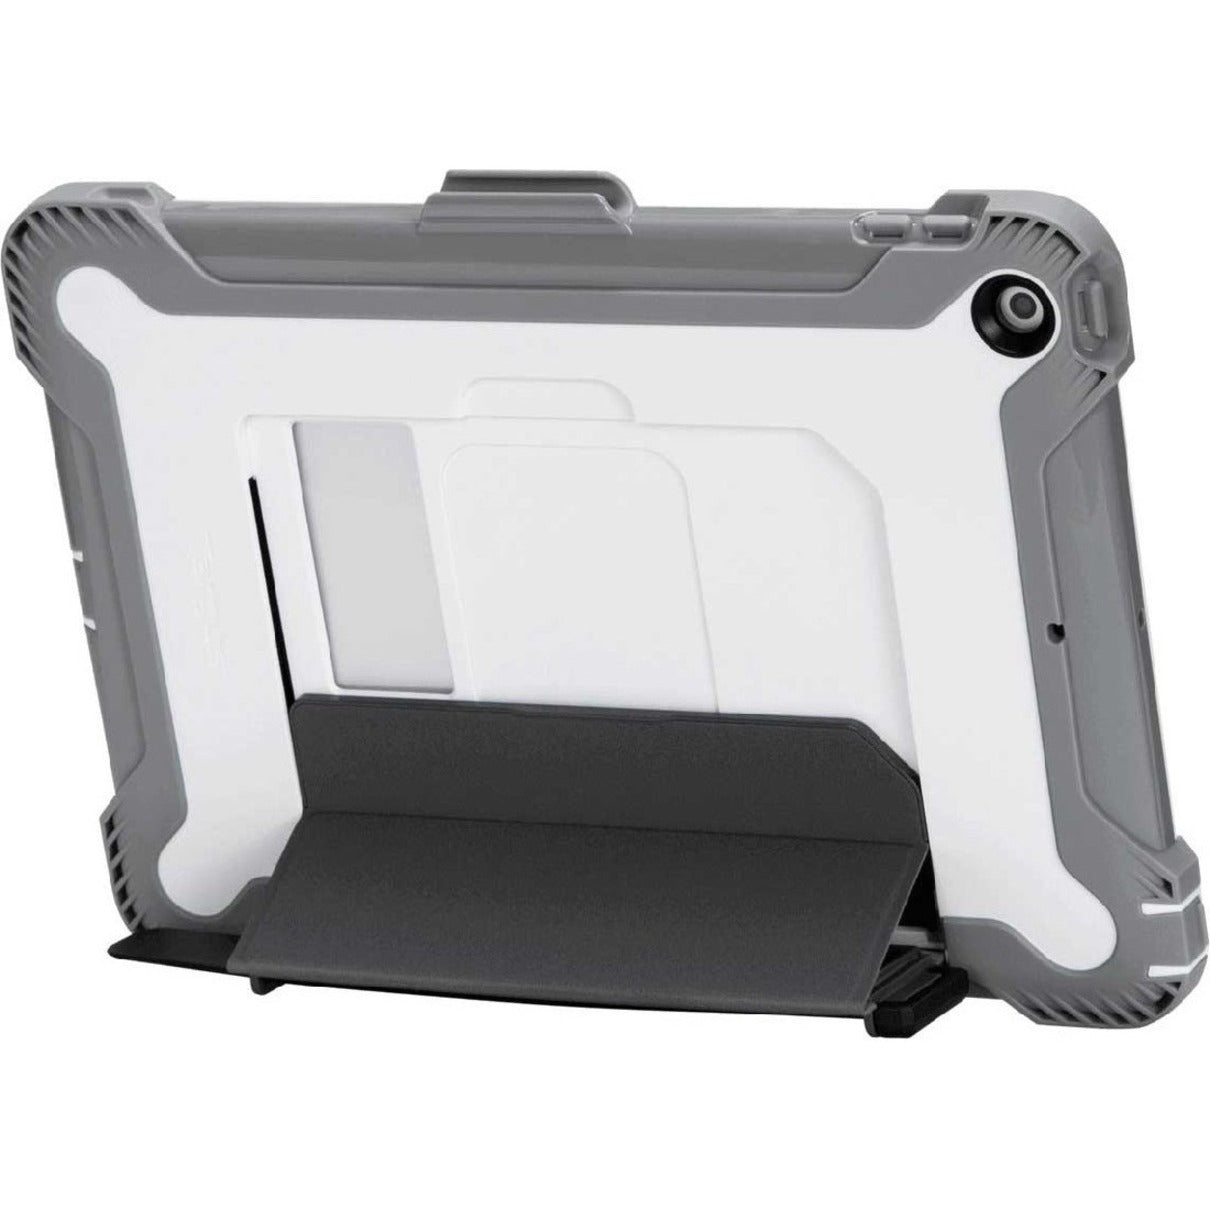 Targus THD49912GLZ SafePort Rugged Healthcare Case for iPad 10.2-inch, Bump Resistant, Shock Absorbing, Water Resistant